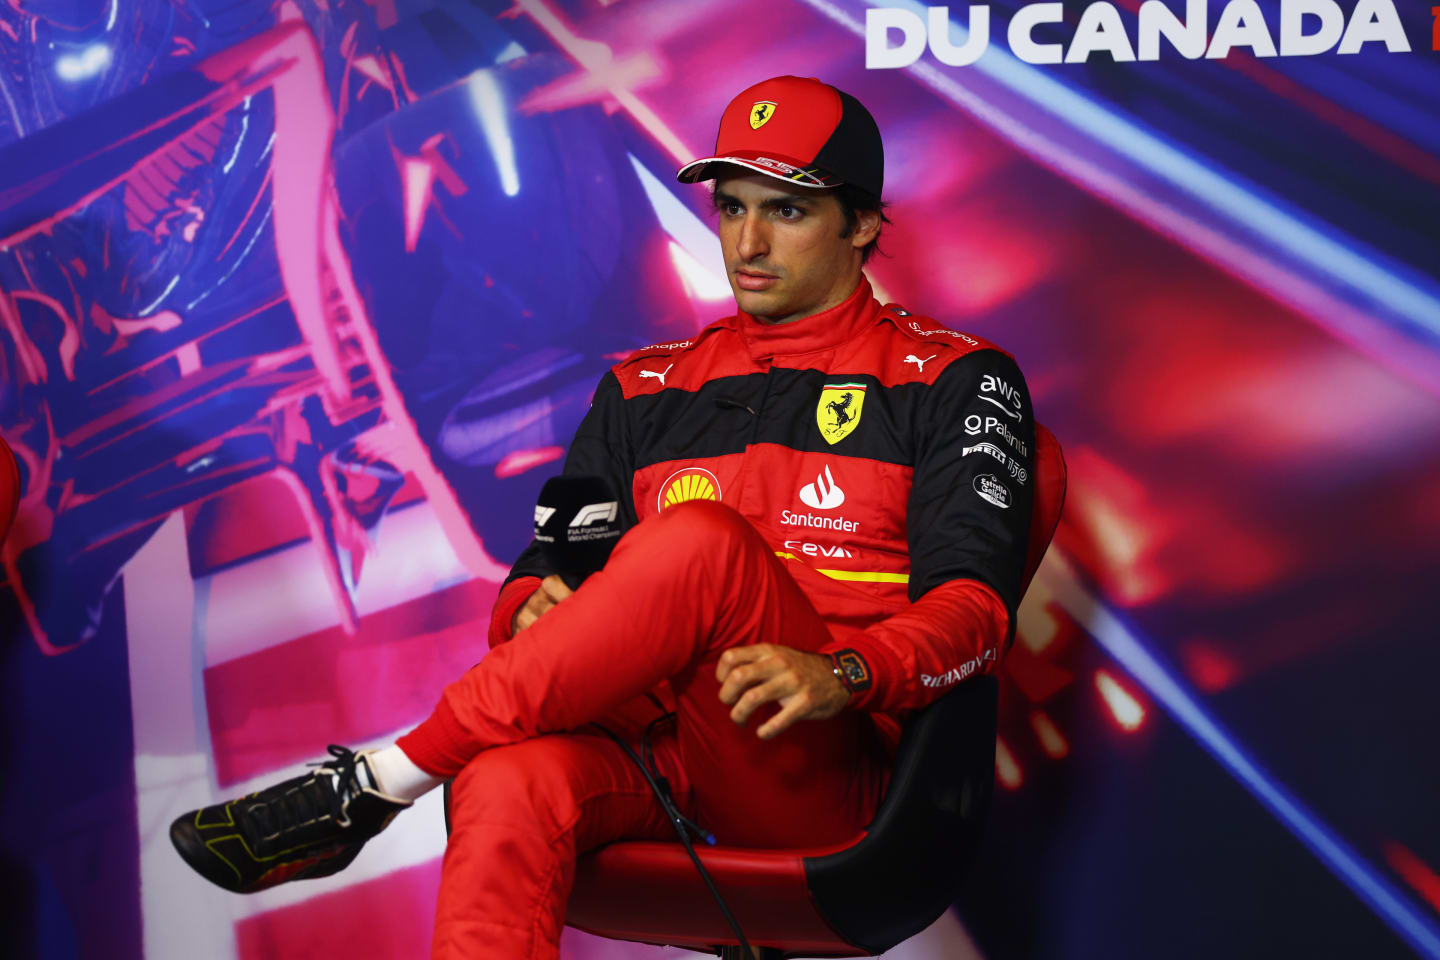 MONTREAL, QUEBEC - JUNE 18: Third placed qualifier Carlos Sainz of Spain and Ferrari looks on in the press conference after qualifying ahead of the F1 Grand Prix of Canada at Circuit Gilles Villeneuve on June 18, 2022 in Montreal, Quebec. (Photo by Lars Baron/Getty Images)